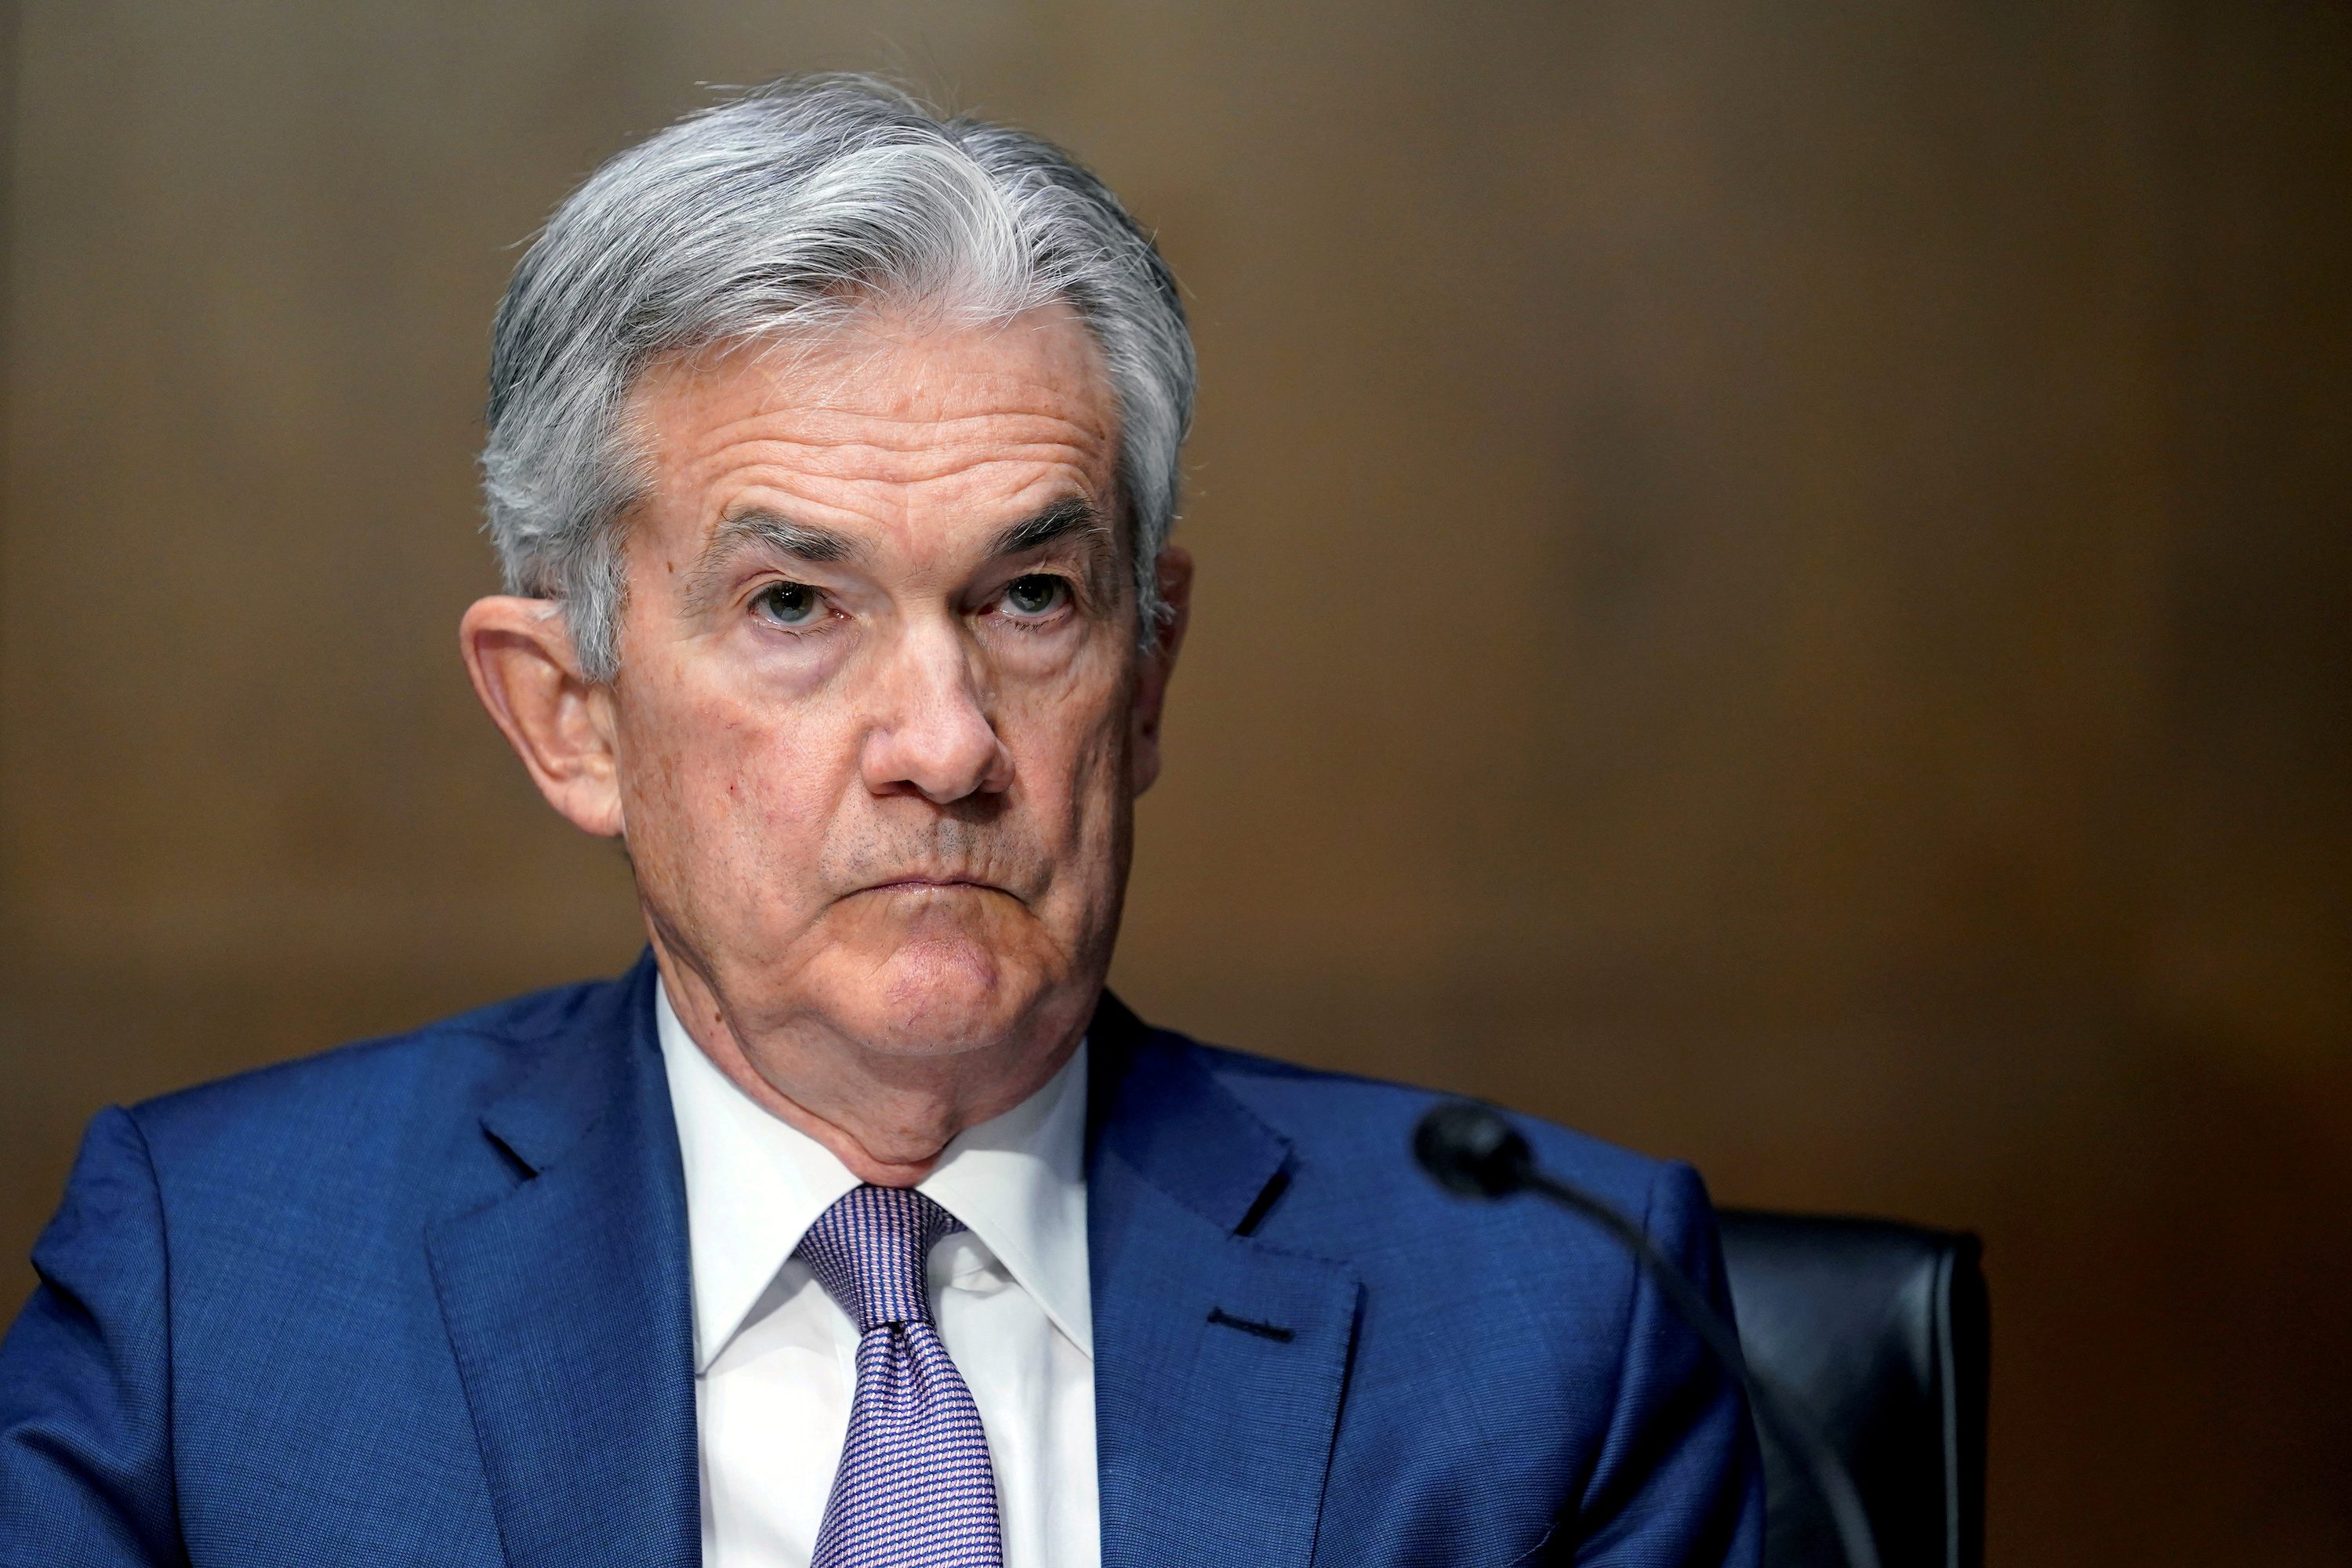 Fed’s Powell: ‘Not the time’ to discuss any change to bond purchases